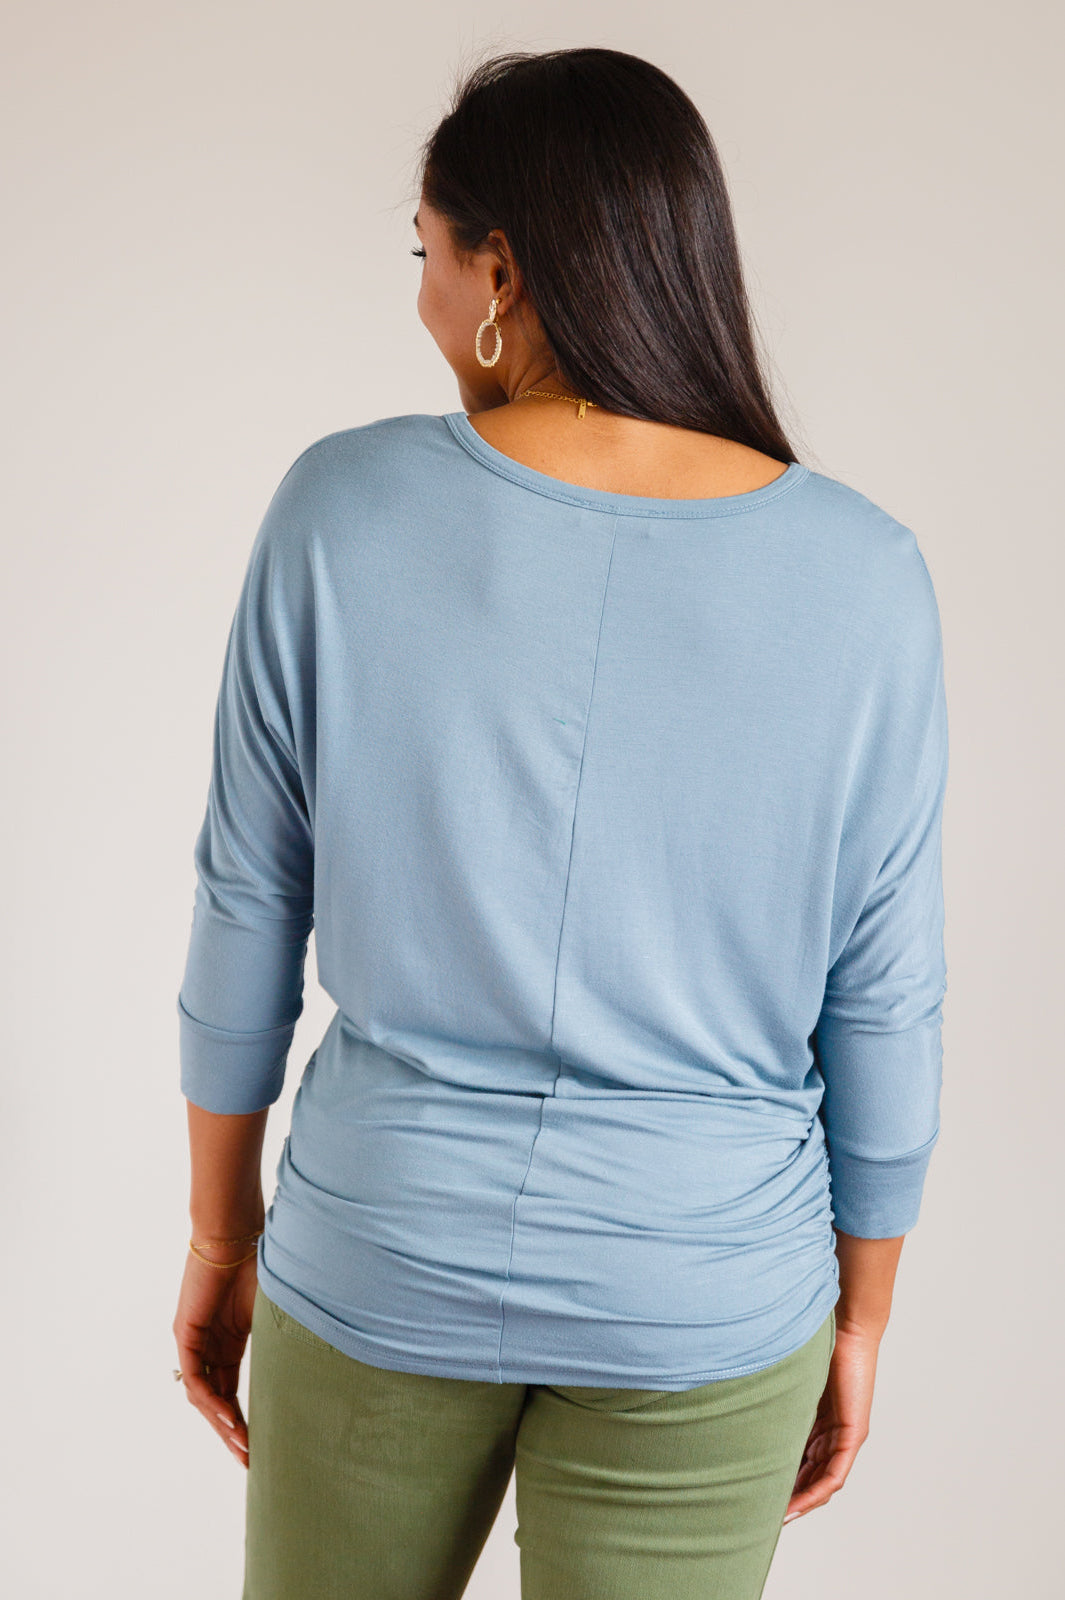 Daytime Boat Neck Top in Blue Gray Ave Shops